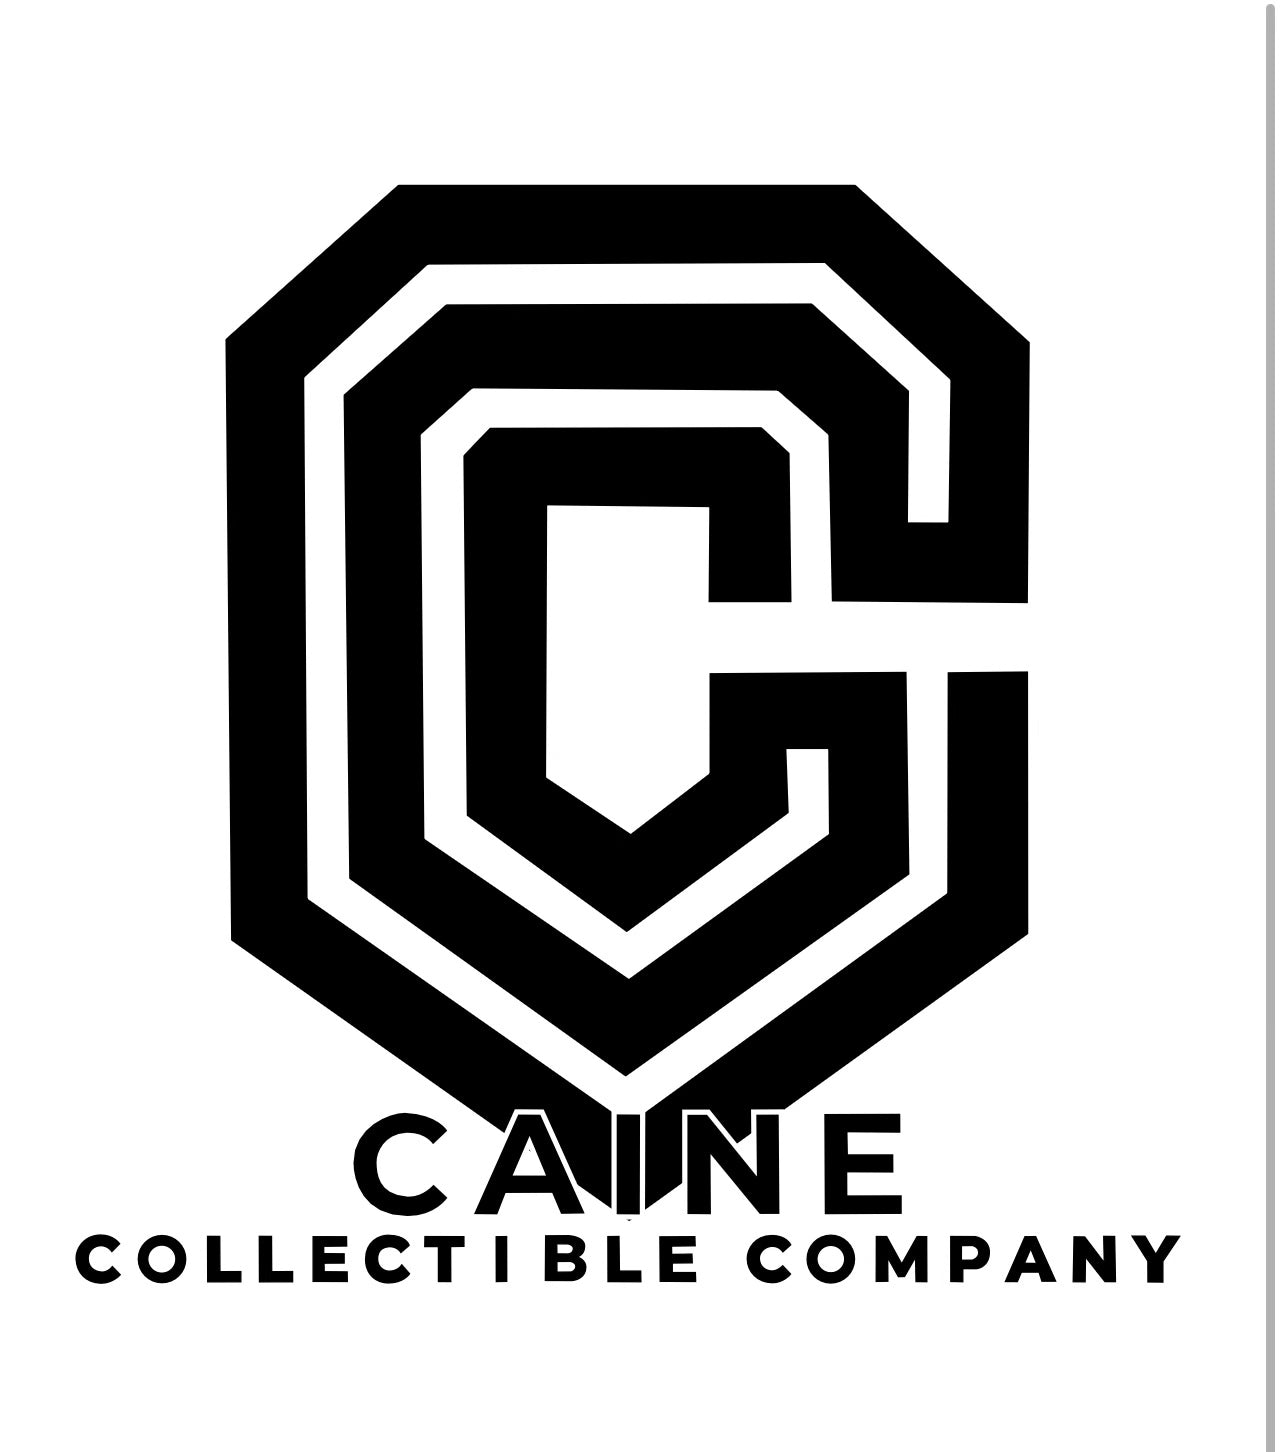 Caine Collectible Co